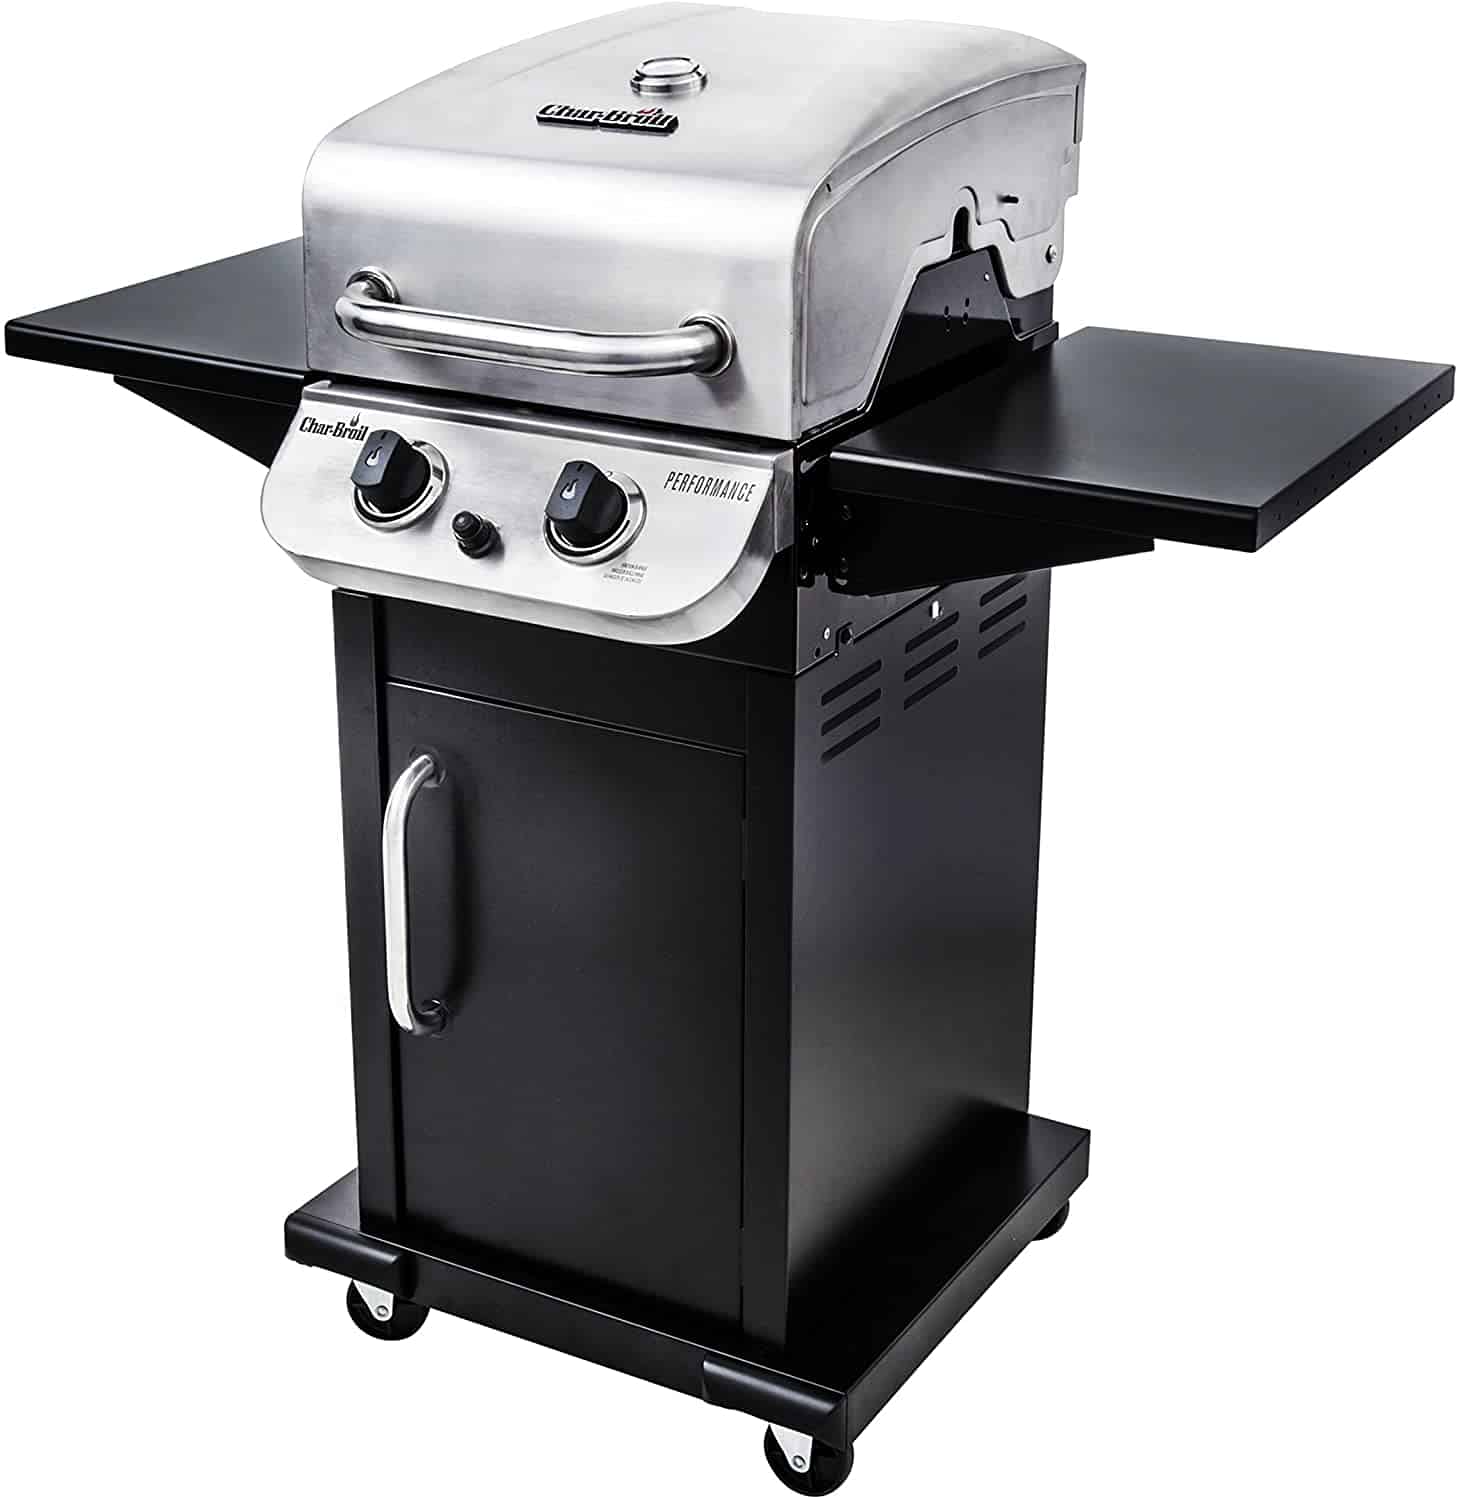 Best stainless steel grill for limited space & budget (propane gas)- Char-Broil Performance 300